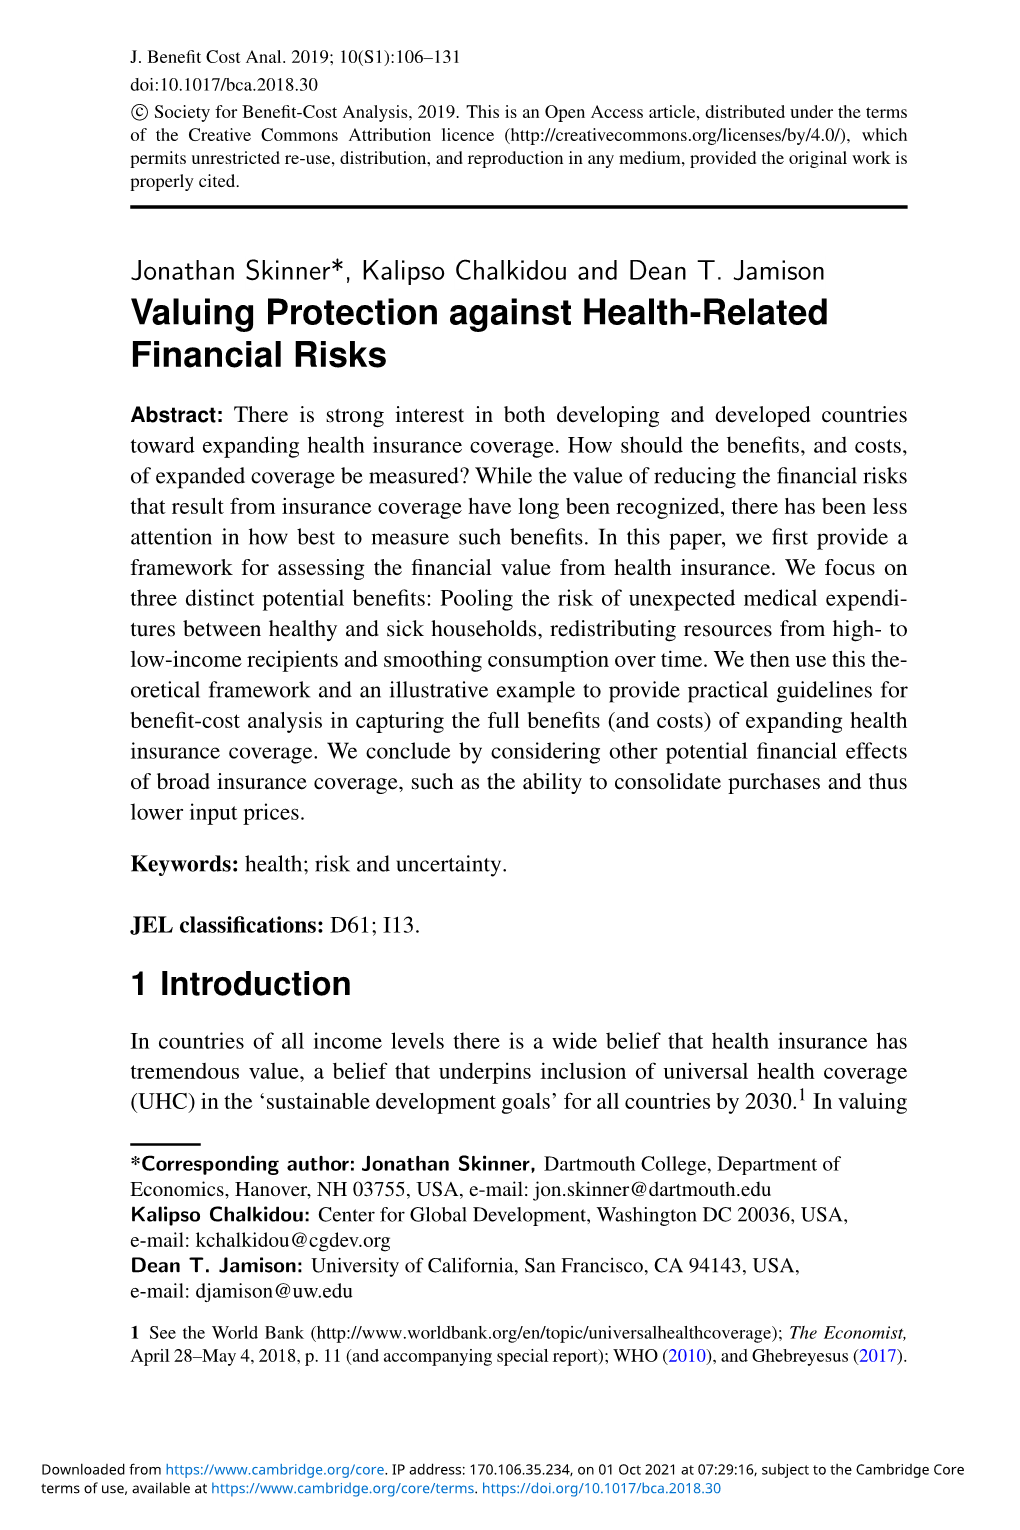 Valuing Protection Against Health-Related Financial Risks